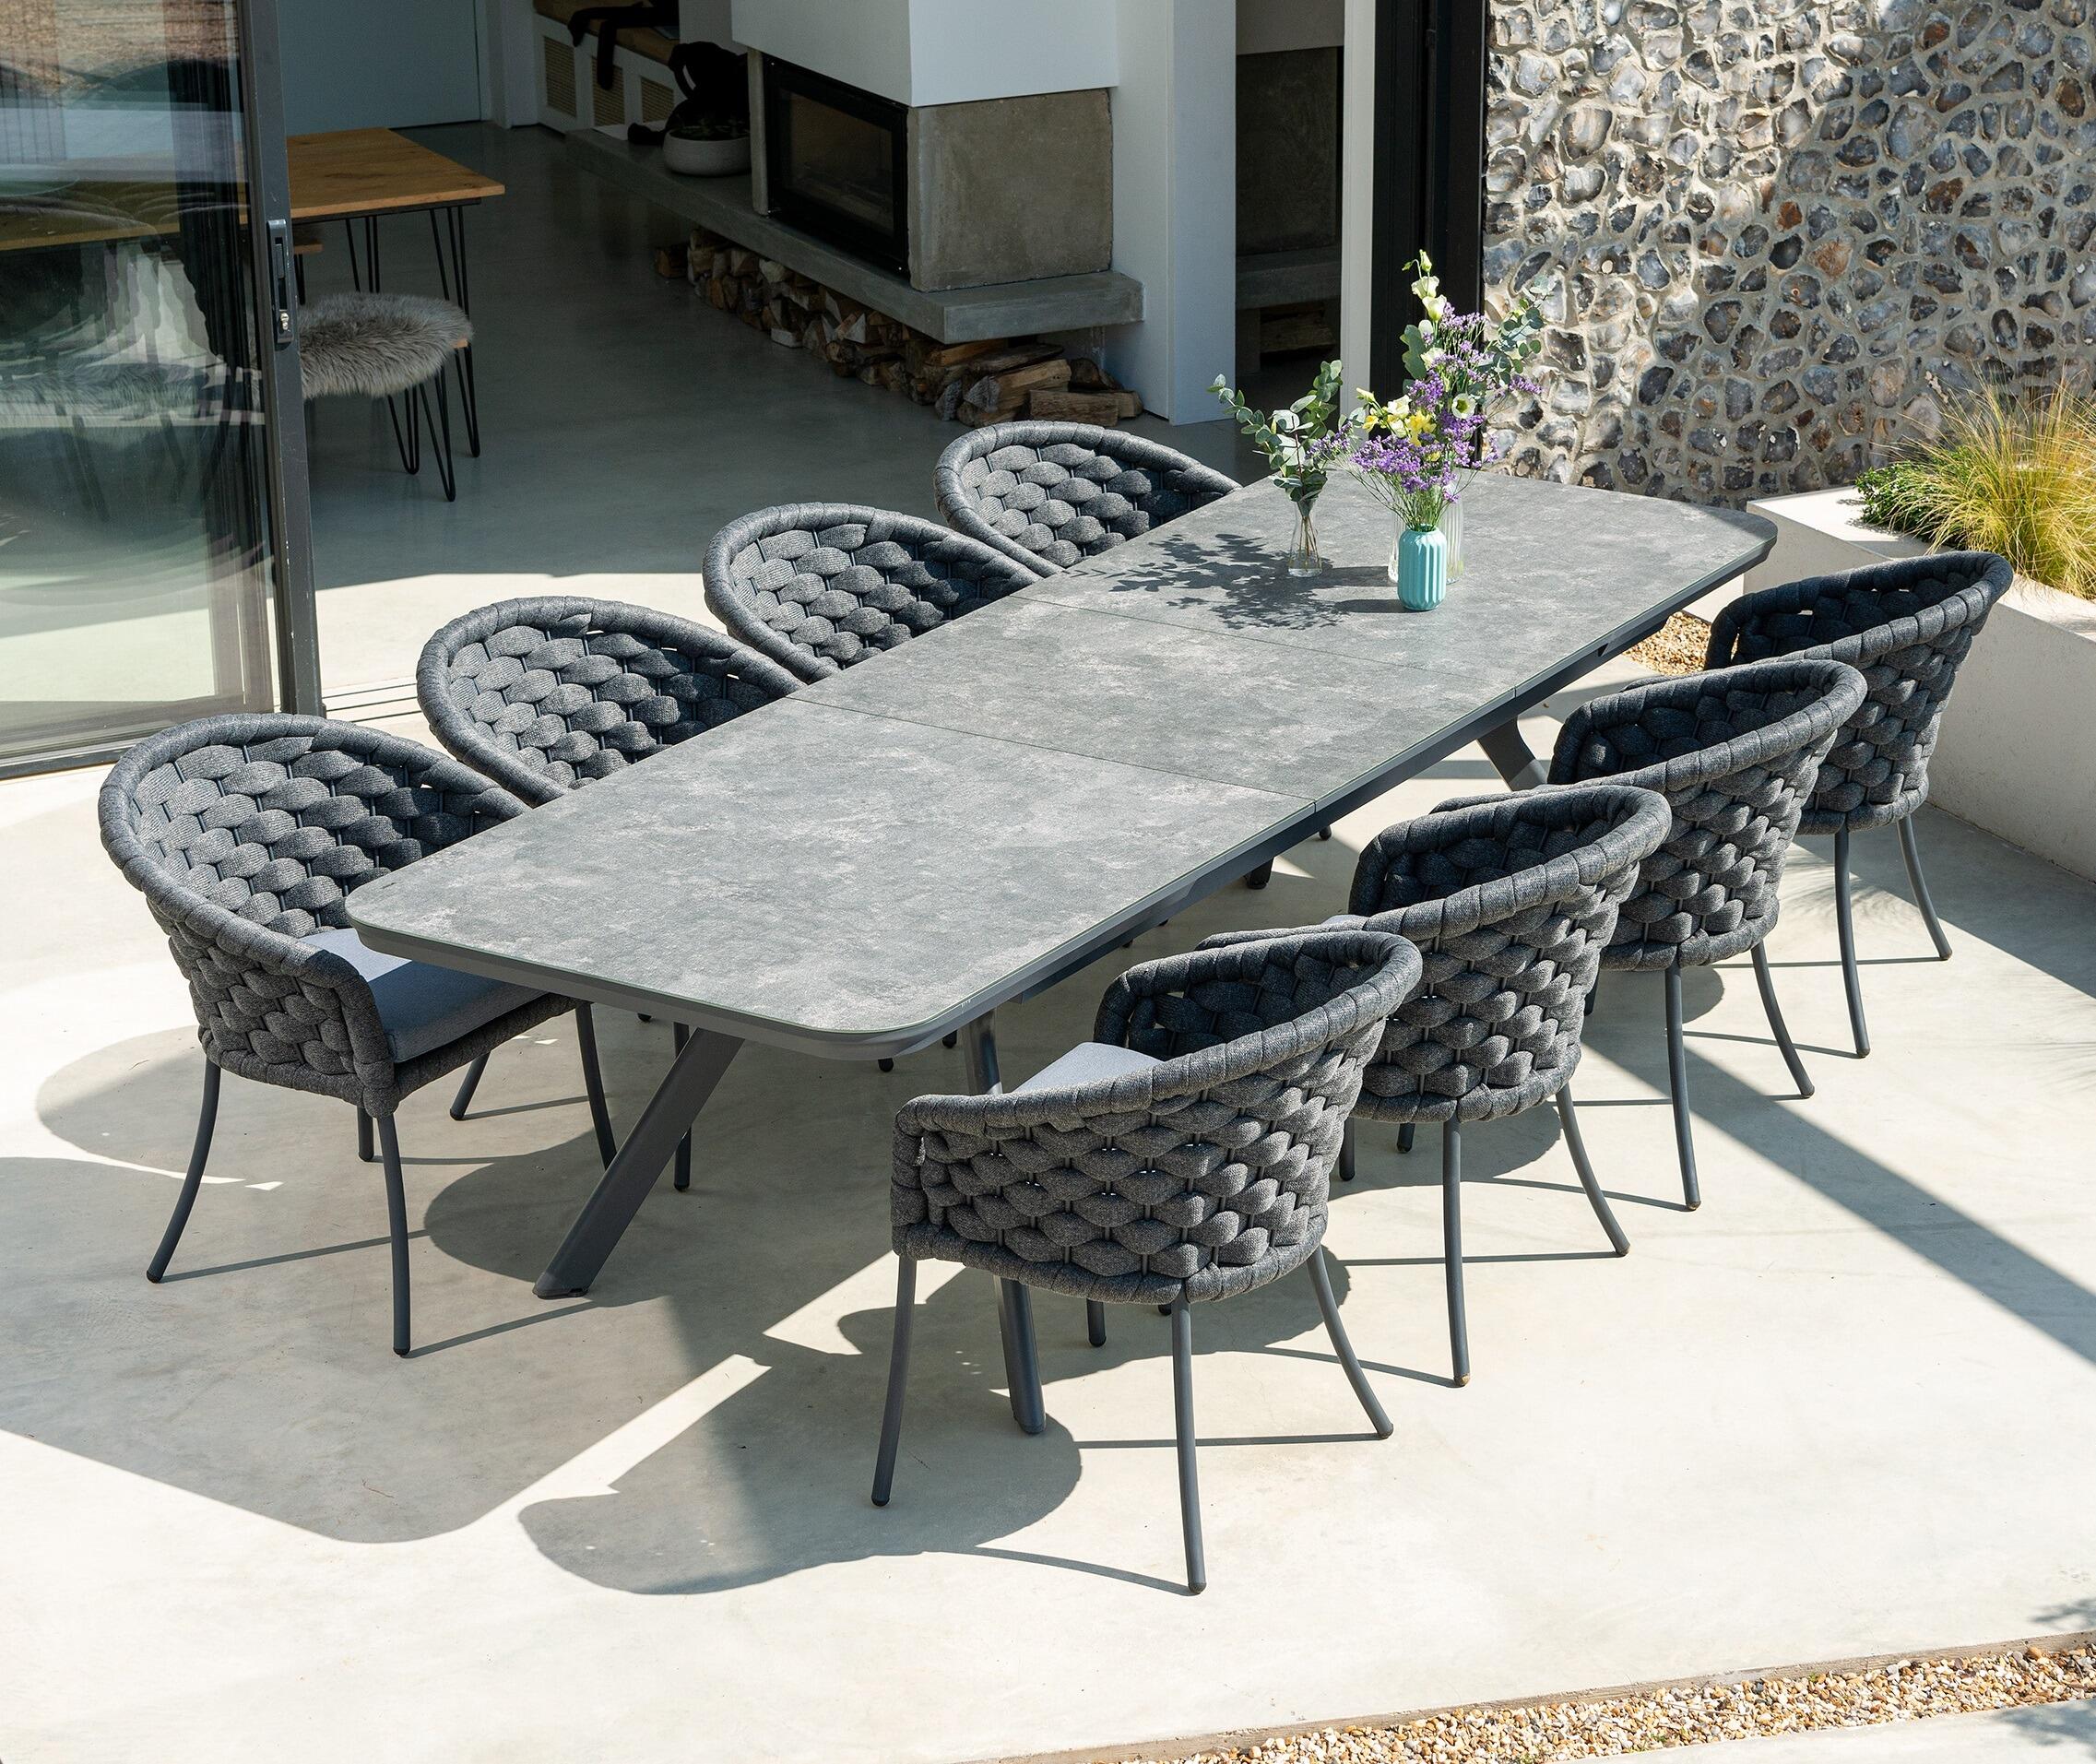 8 seater extending garden dining table metal aluminium hpl and wide all weather rope weave patio dining chairs dark grey